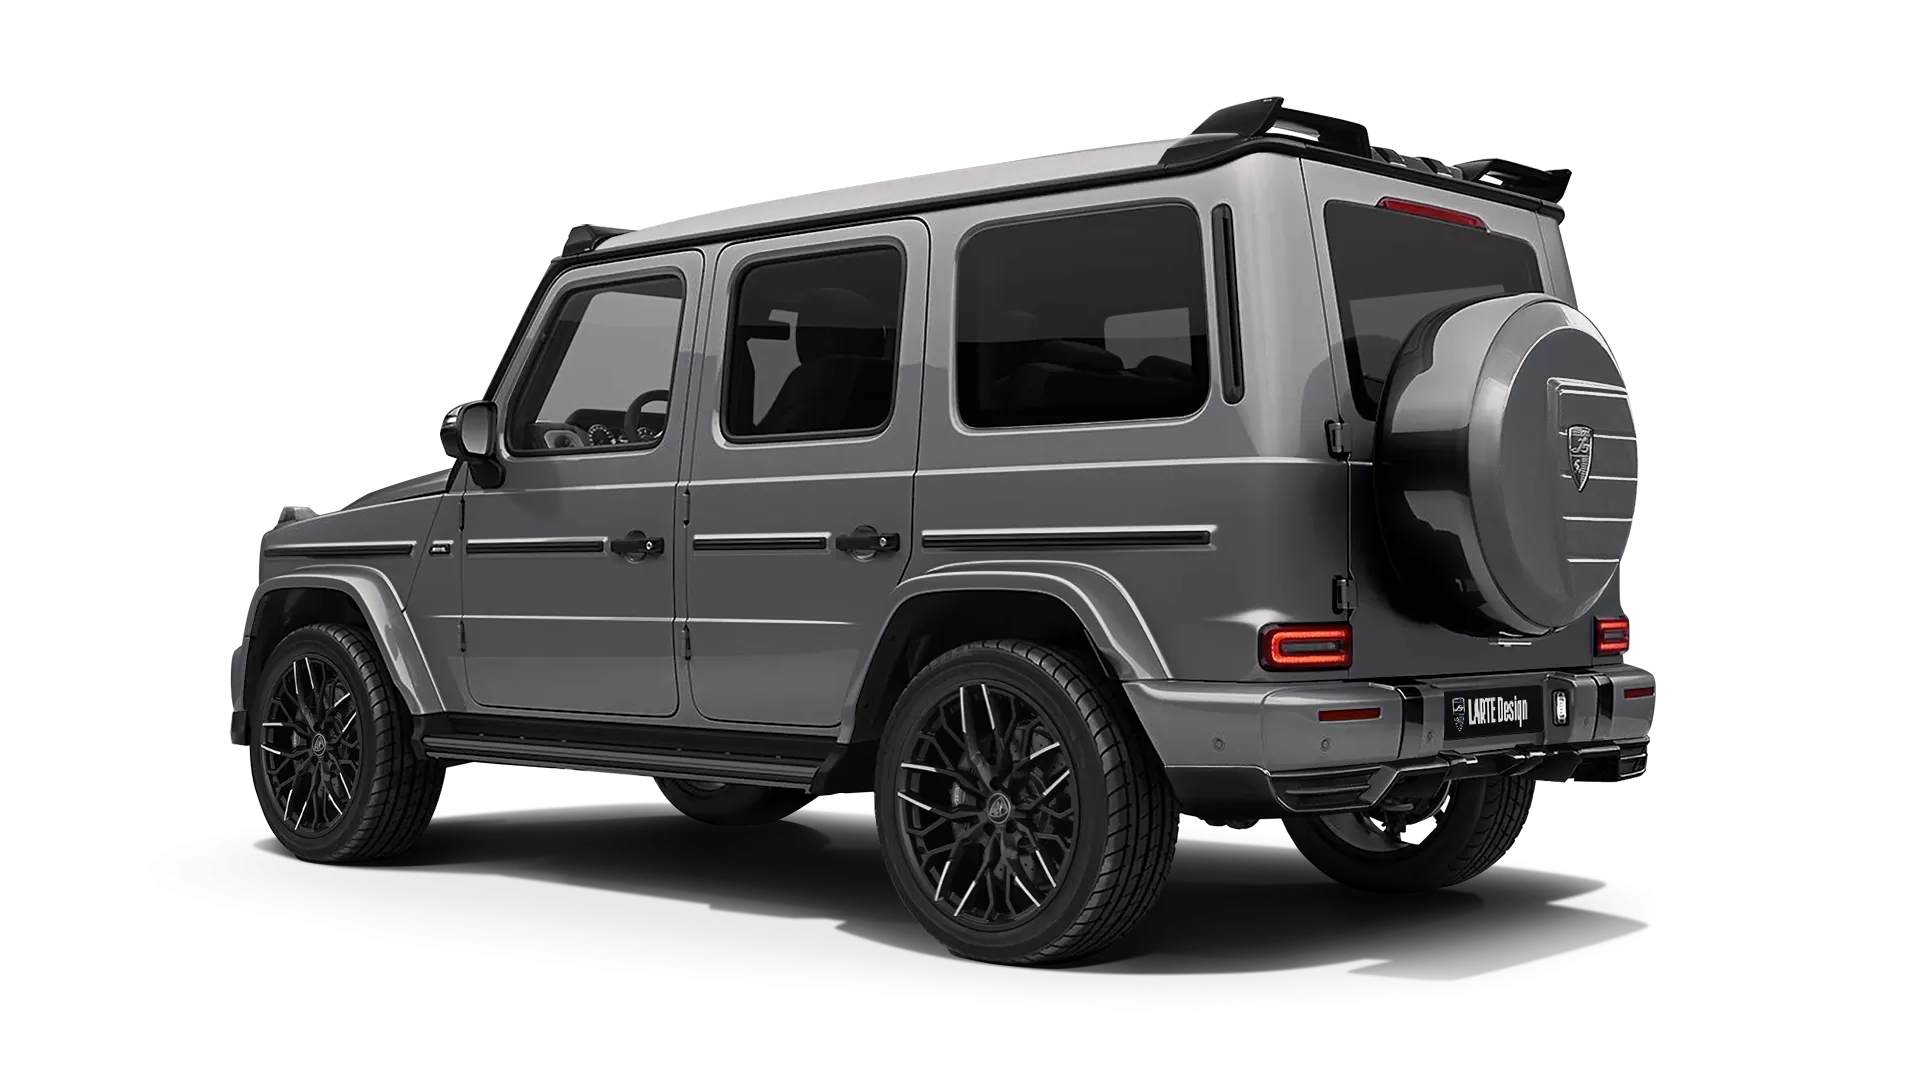 Mercedes G class W463 with painted body kit: rear view shown in Mojave Silver